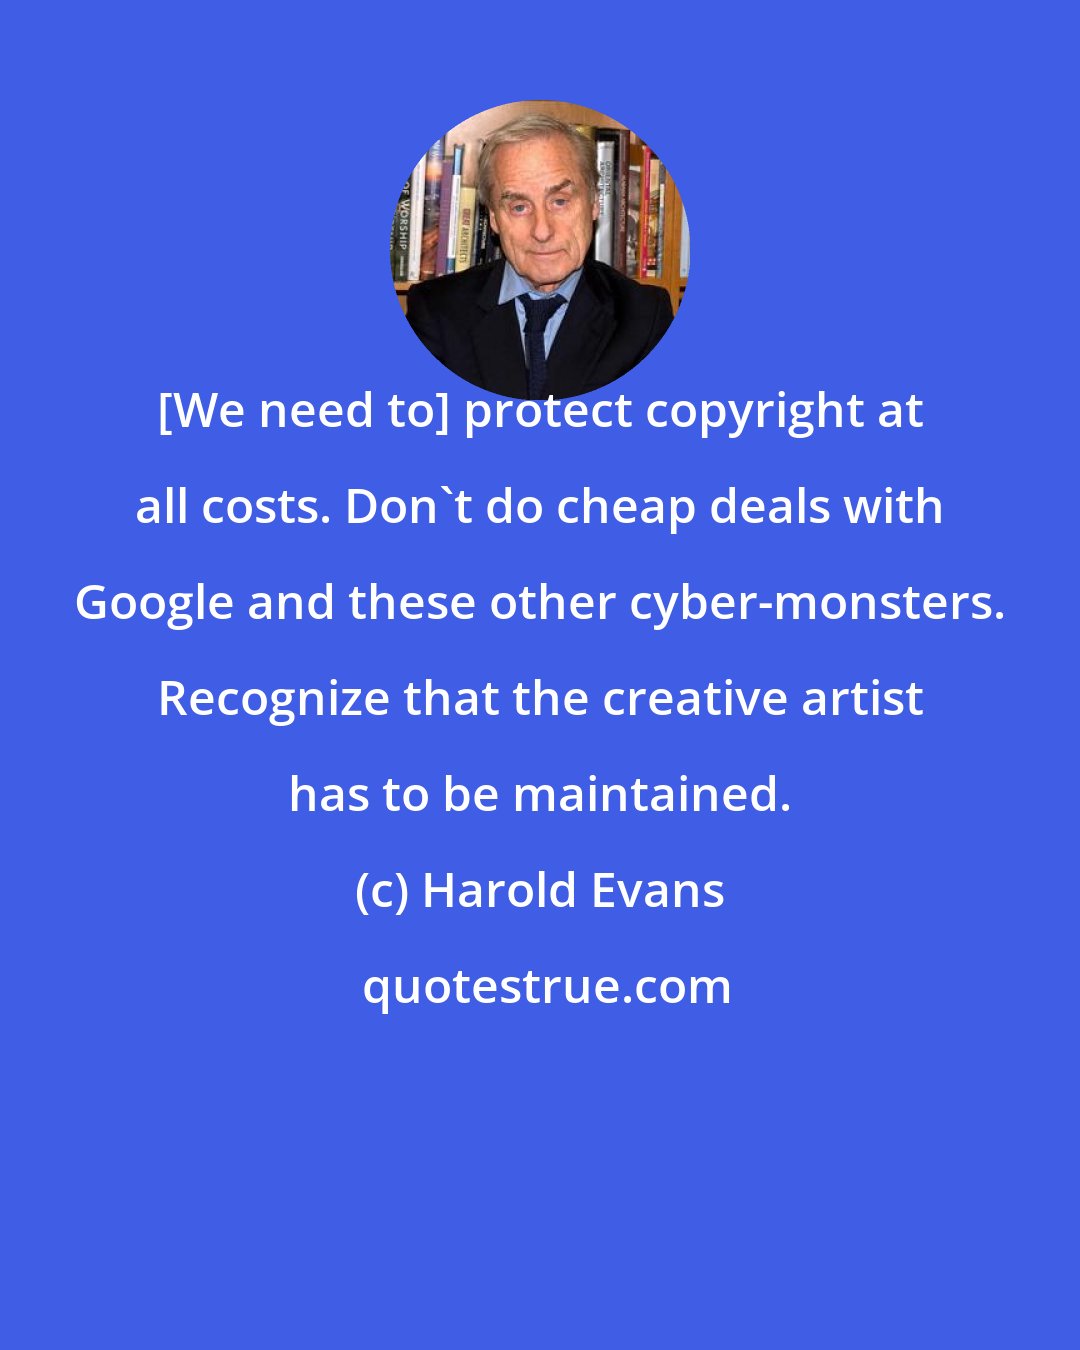 Harold Evans: [We need to] protect copyright at all costs. Don't do cheap deals with Google and these other cyber-monsters. Recognize that the creative artist has to be maintained.